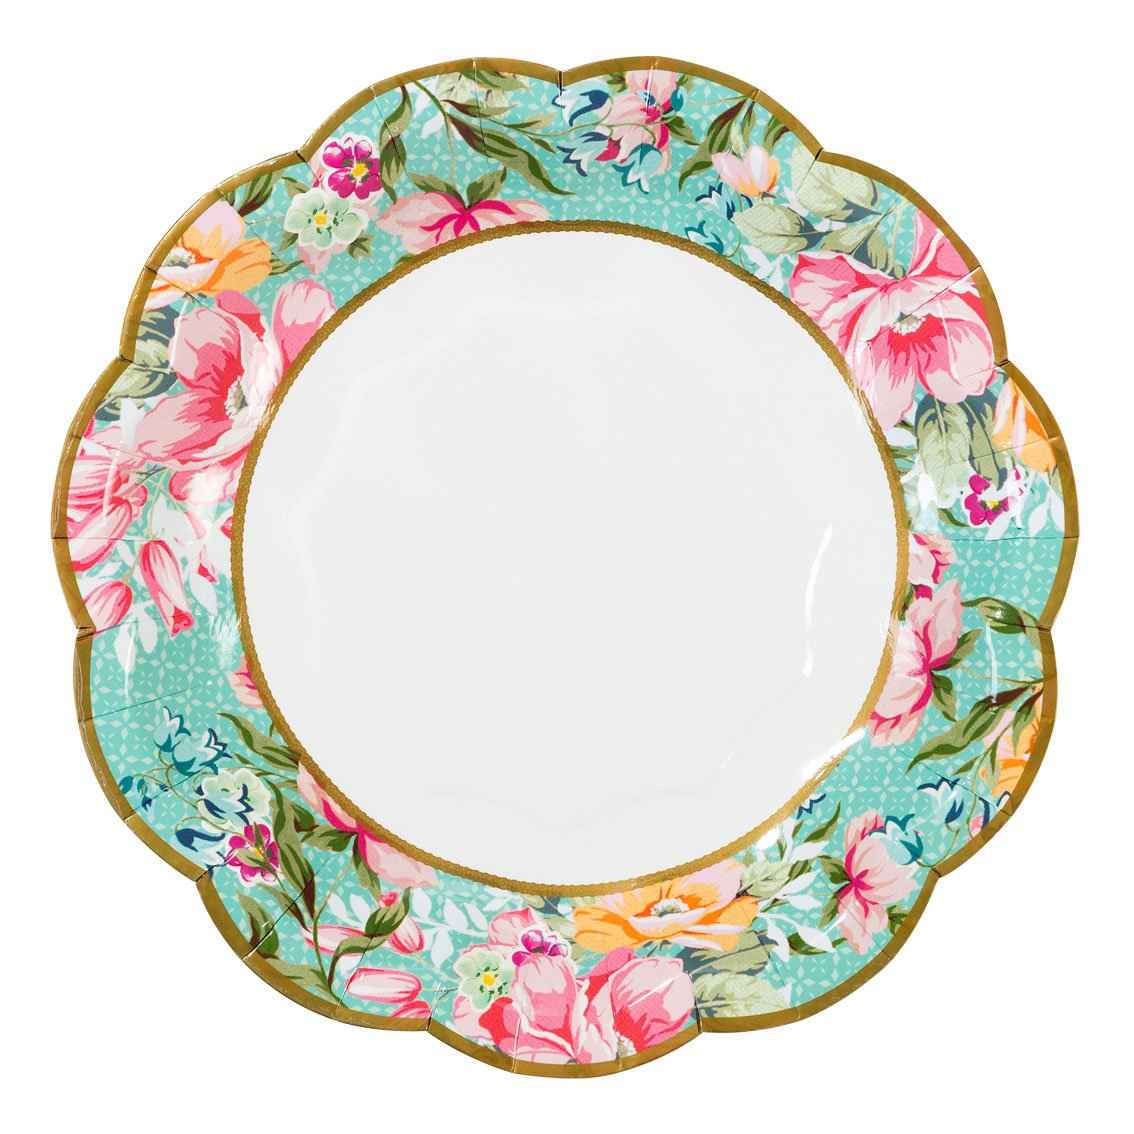 Small Plates Truly Vintage Paper Plates - 12 Pack